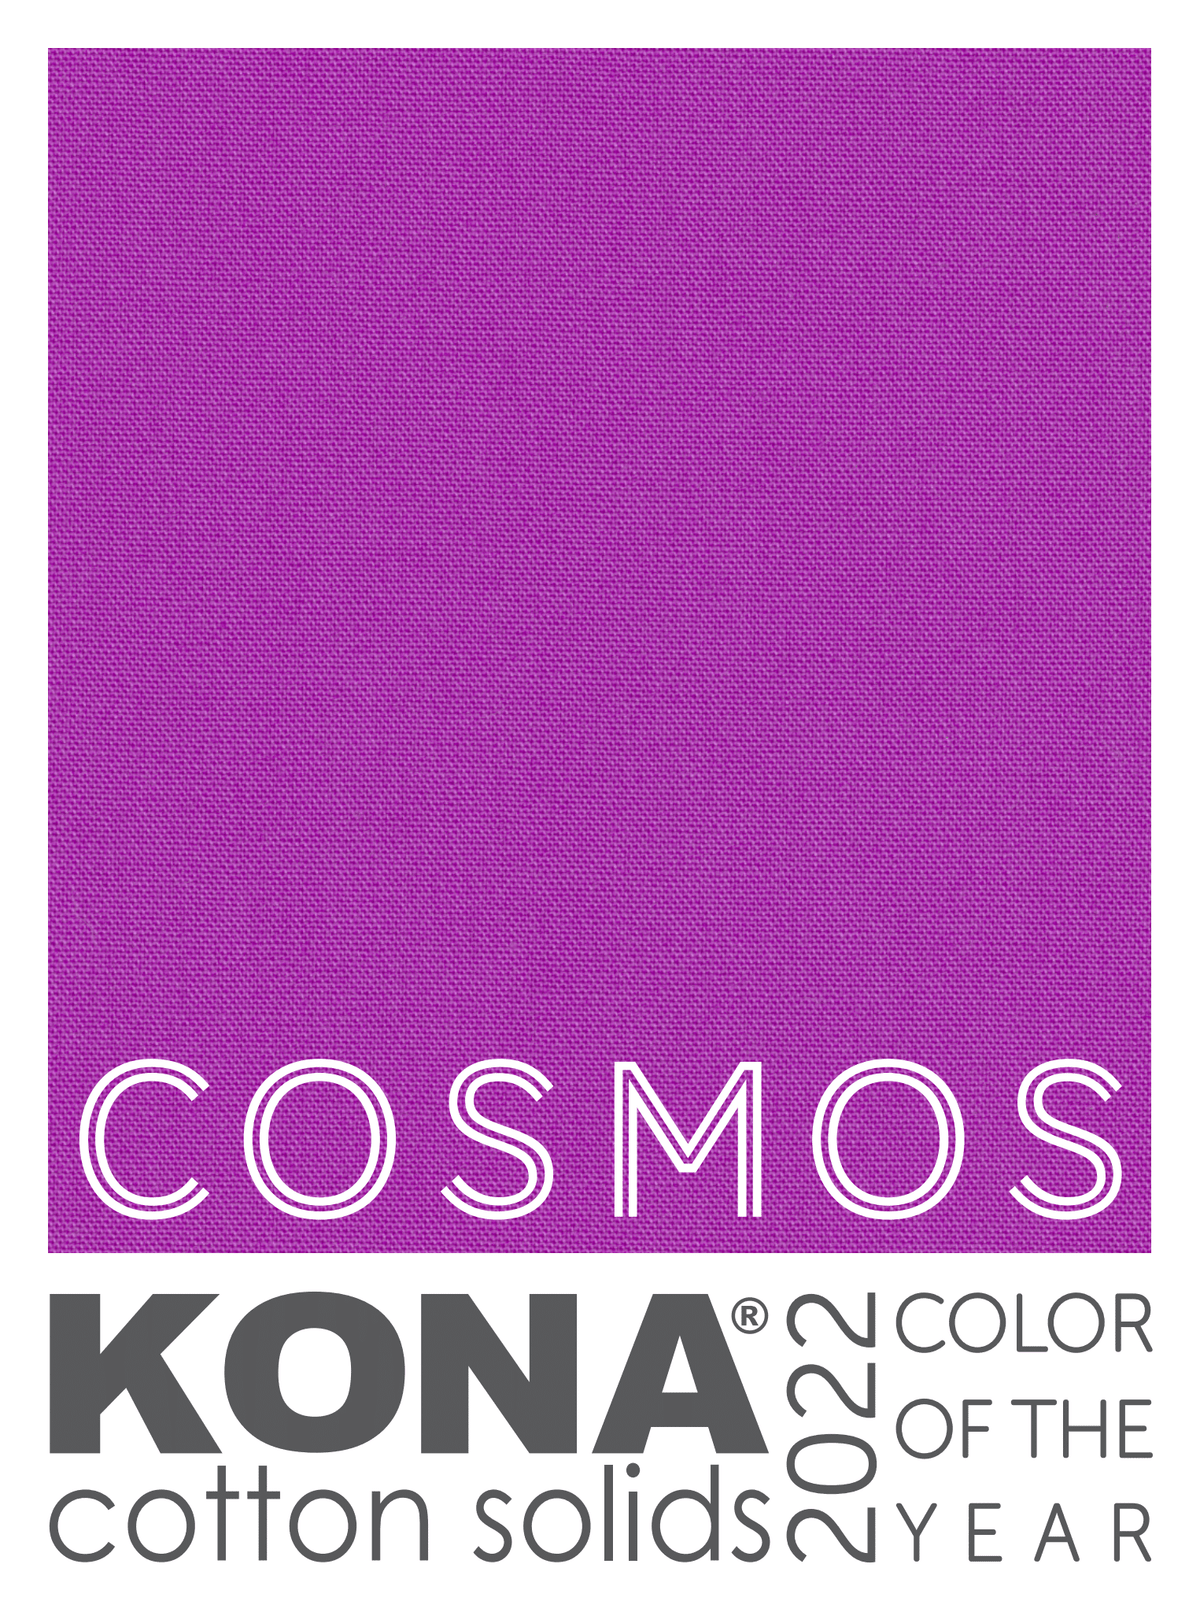 Kona Cotton Solid in Cosmos Purple - K001-1987 - KONA 2022 COLOR OF THE YEAR